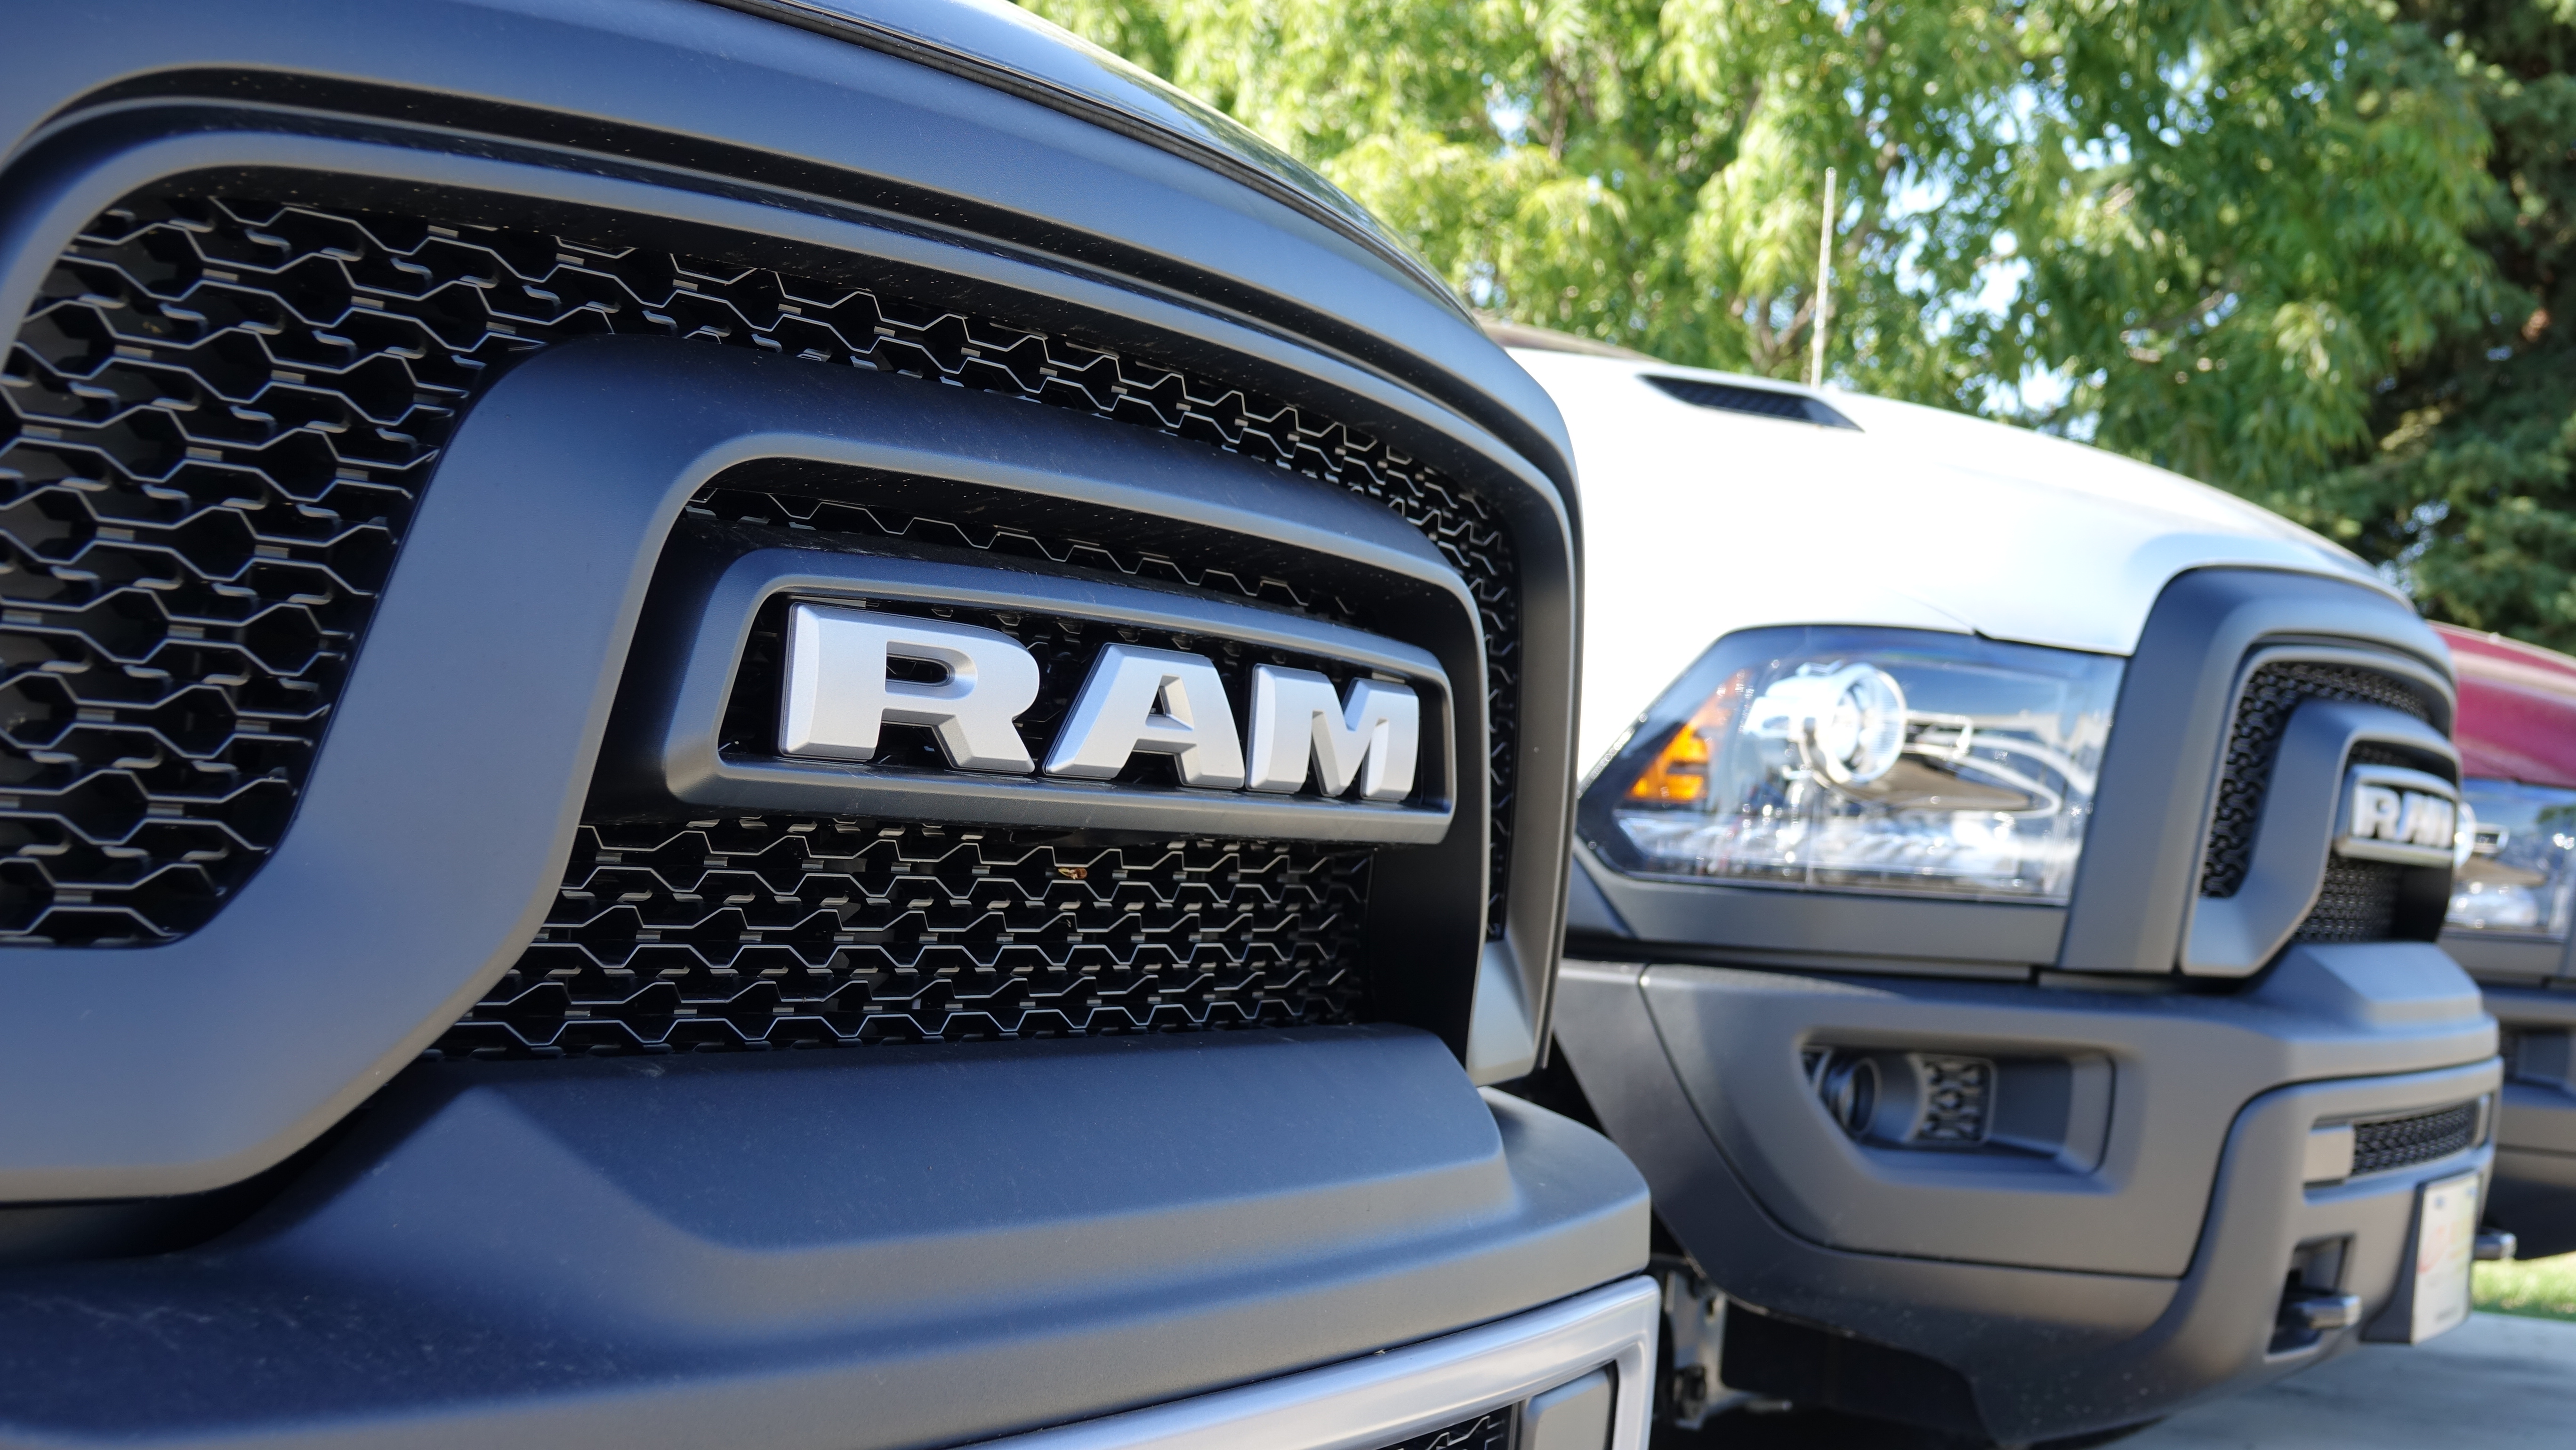 Save on RAMs right now at Eide Chrysler!